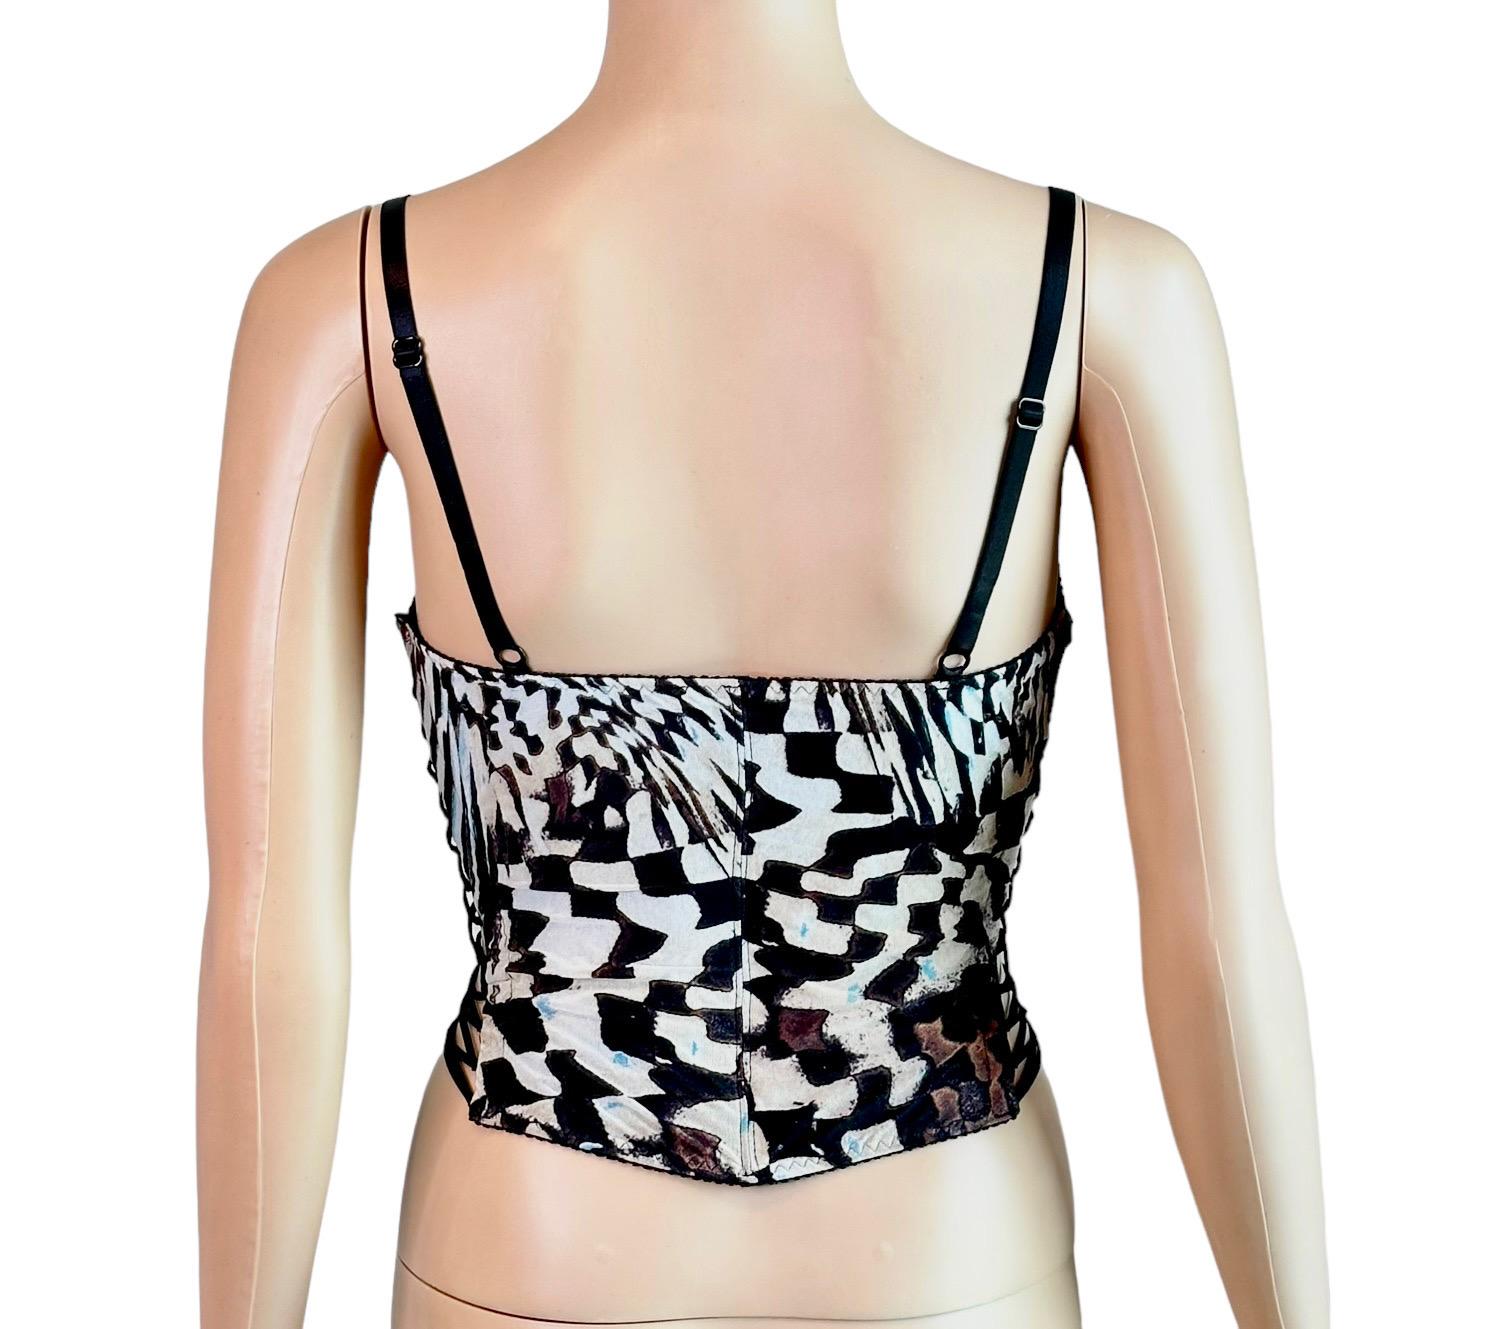 Roberto Cavalli Bustier Corset Lace Up Abstract Print Crop Top 4